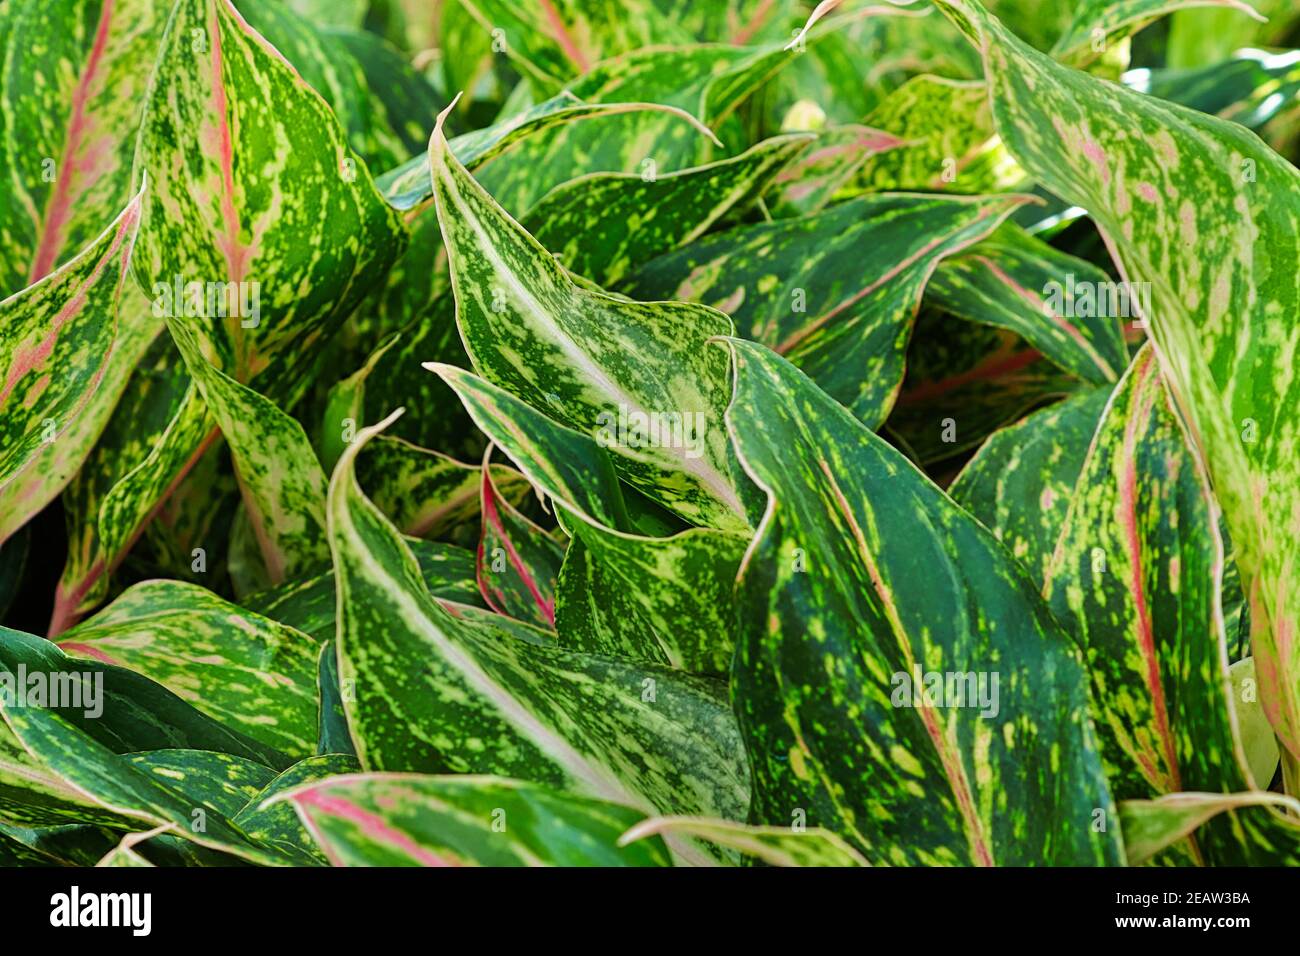 Pink and silver varigated Chinese Evergreen houseplants Stock Photo